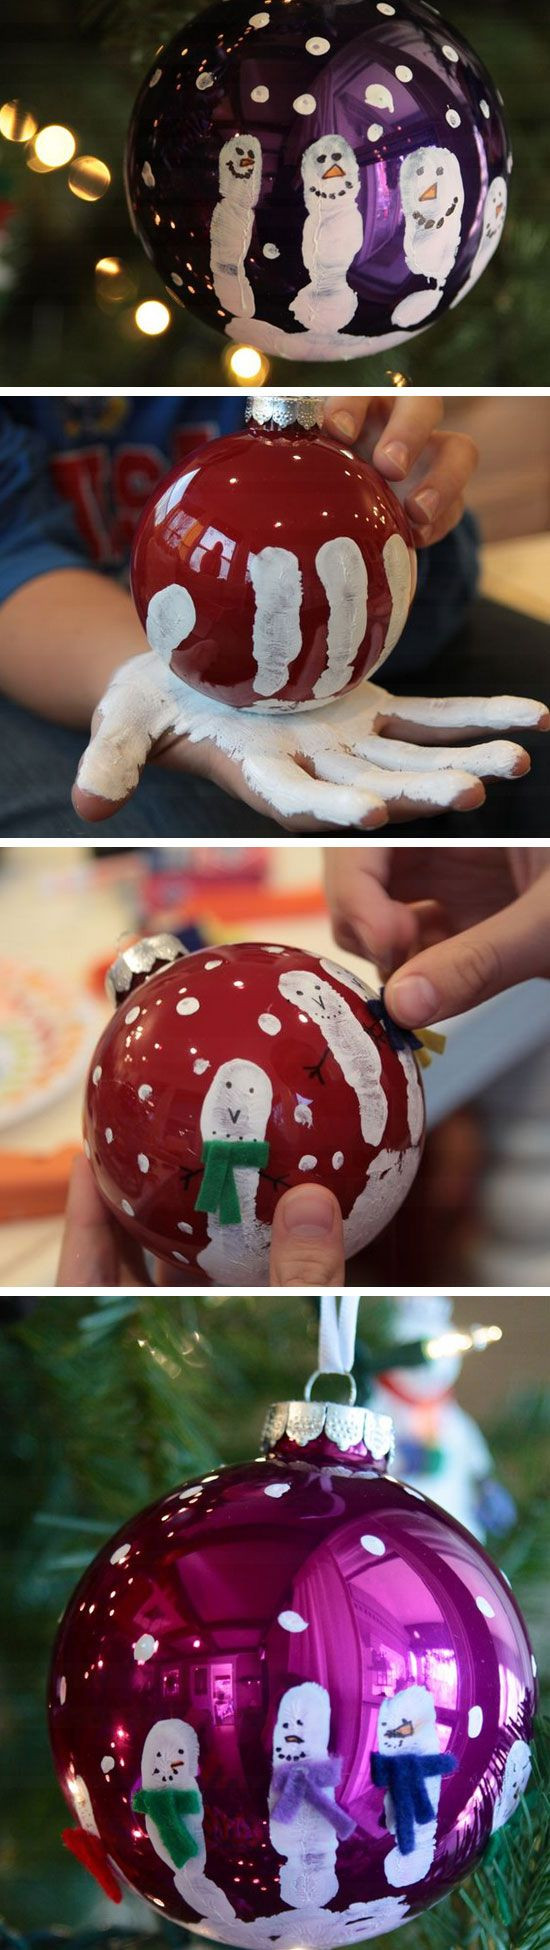 Toddlers Christmas Craft Ideas
 Easy and Cute DIY Christmas Crafts for Kids to Make Hative